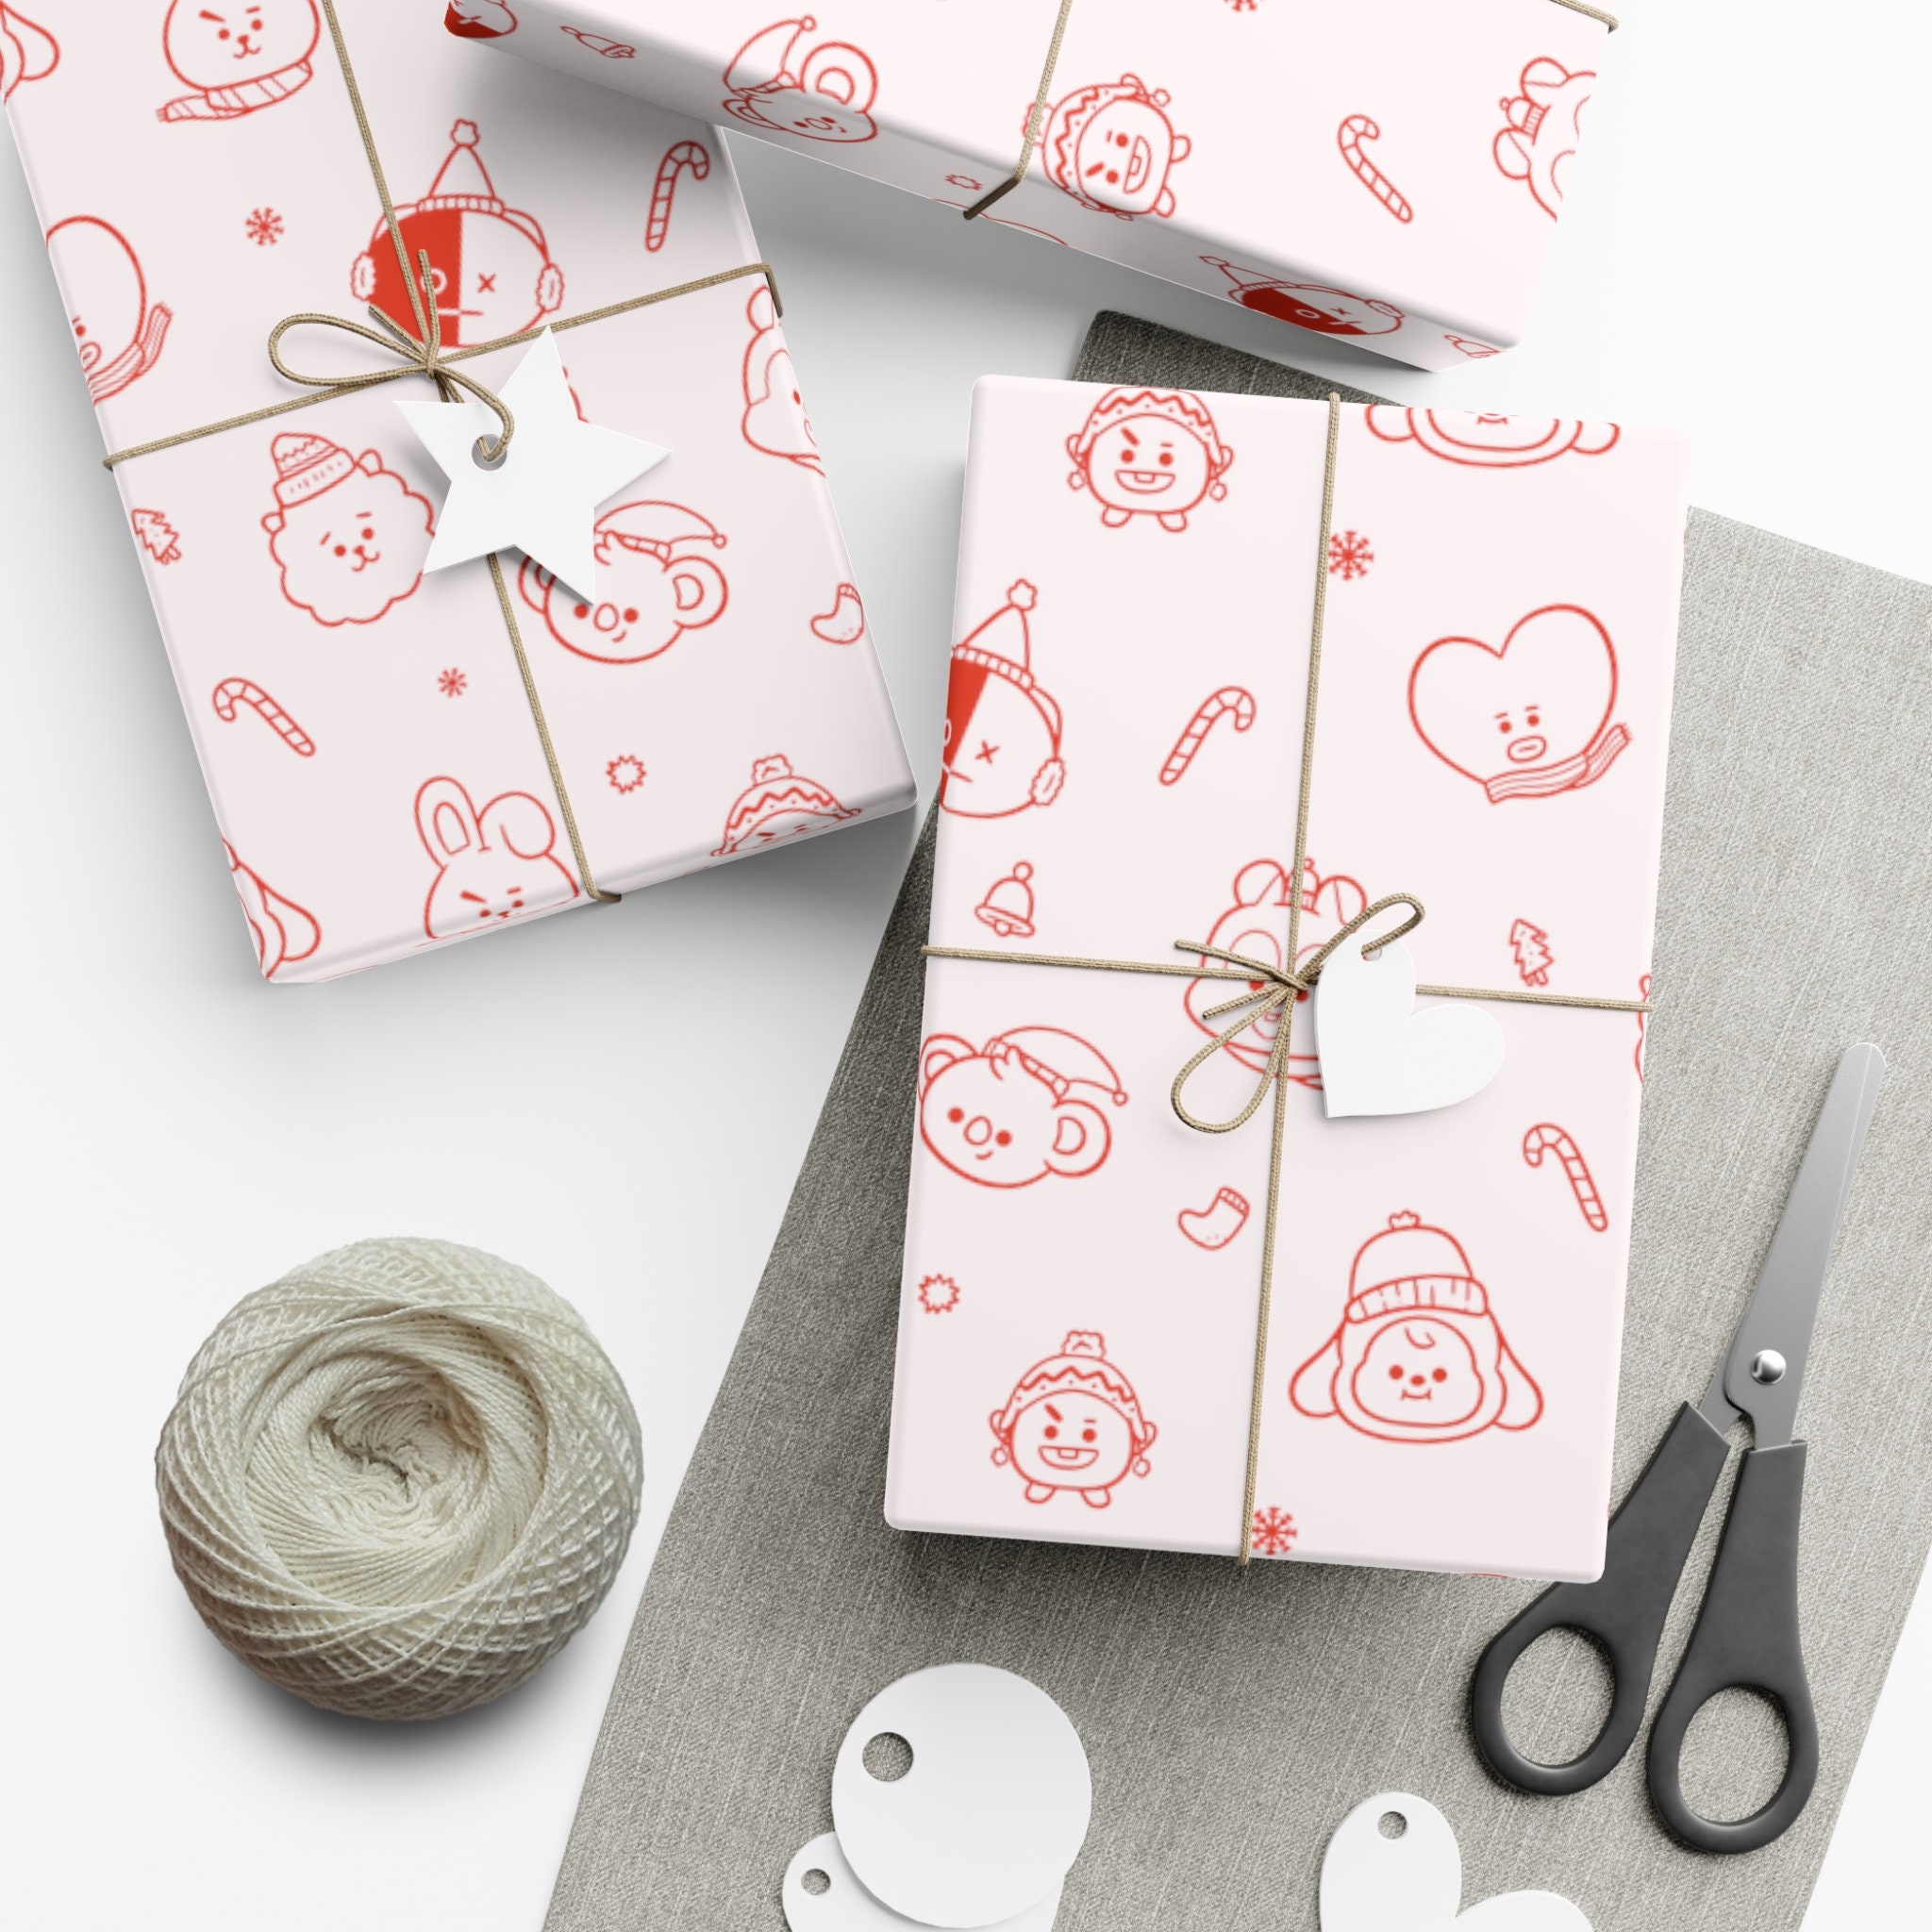 BTS Christmas Wrapping Paper Korean K-pop Gift Wrap, Fun BTS K-pop Gift Wrap,  BTS K-pop Scrapbooking Paper 